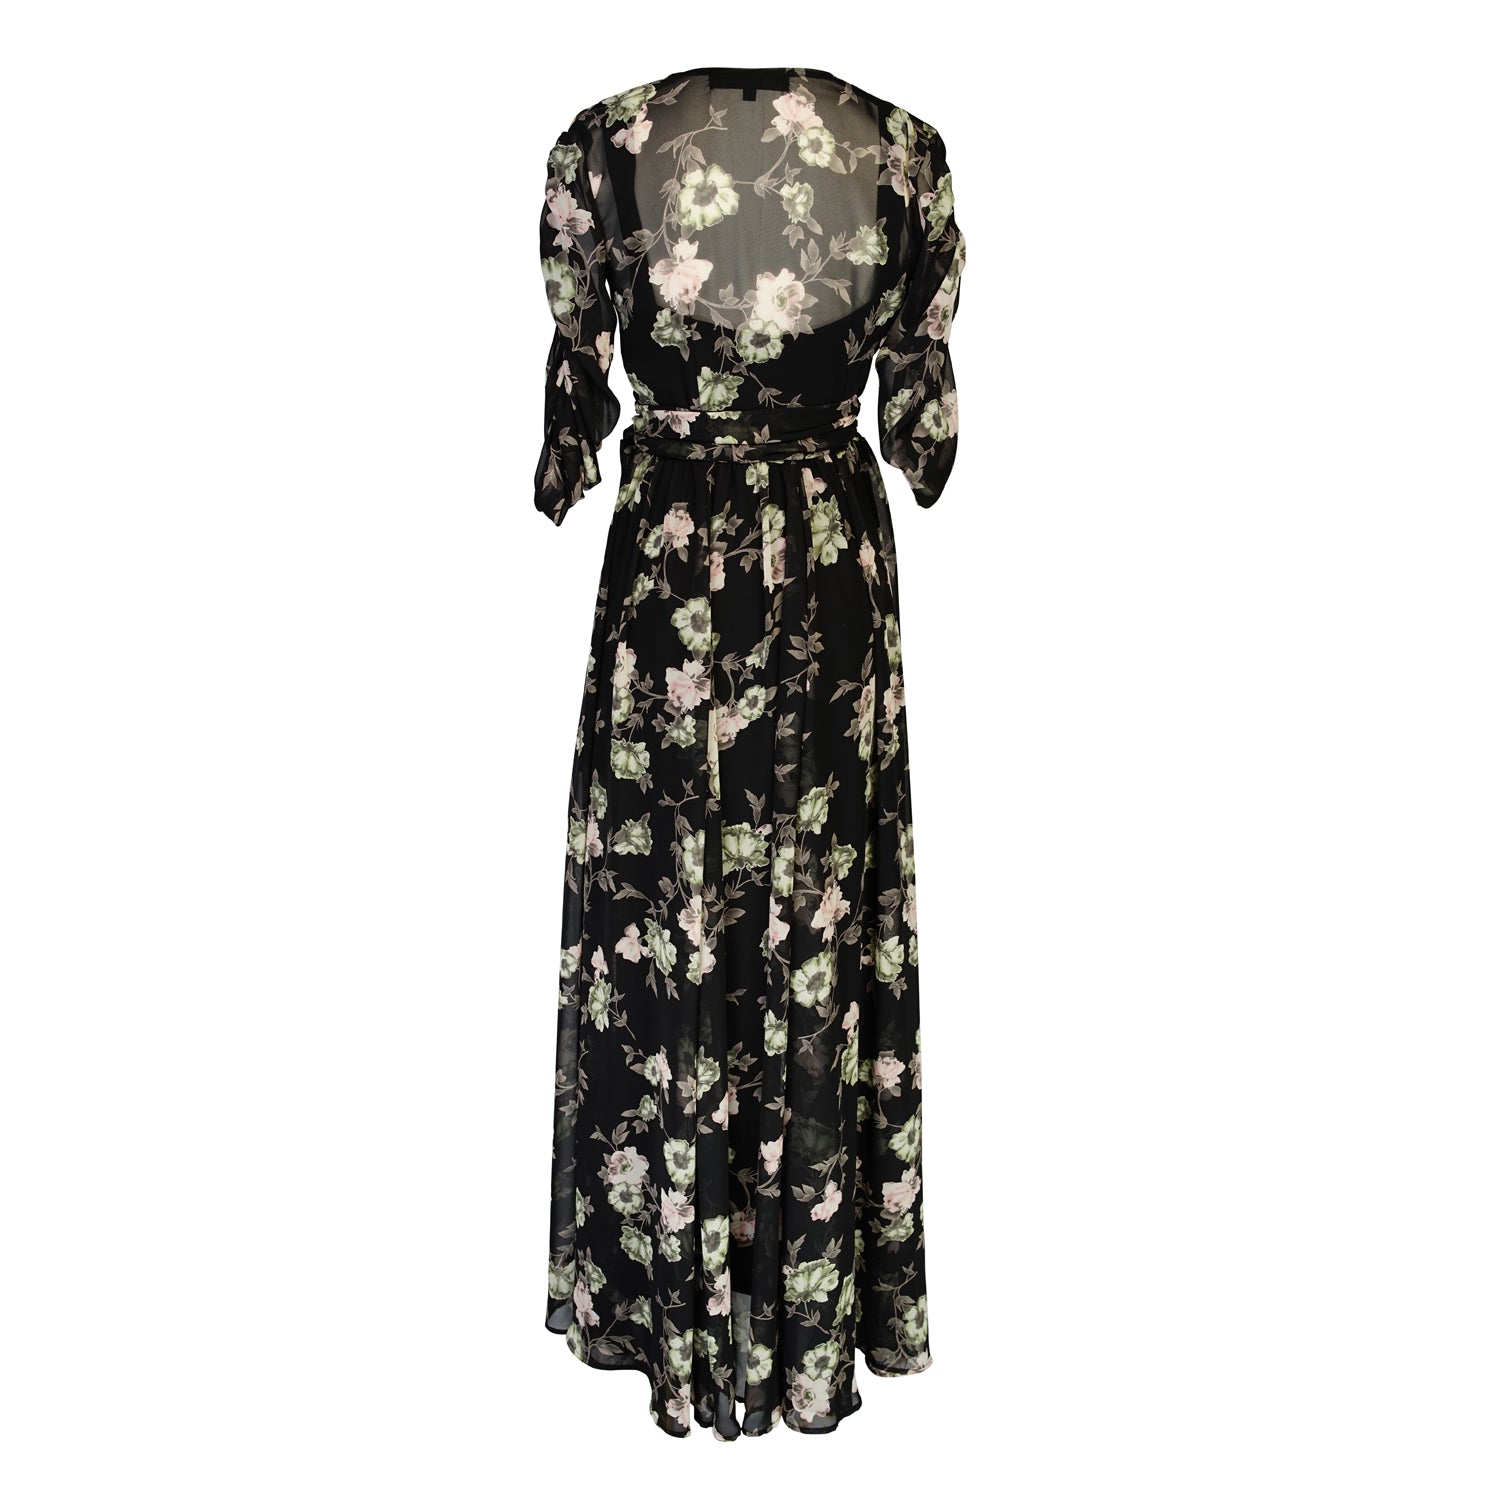 jennafer grace Signature Wrap Dress in Noir Garden onyx black maxi dress with pastel floral flower print with long waist tie and ruched sleeves boho bohemian hippie romantic whimsical spring gown wedding guest dress unisex handmade